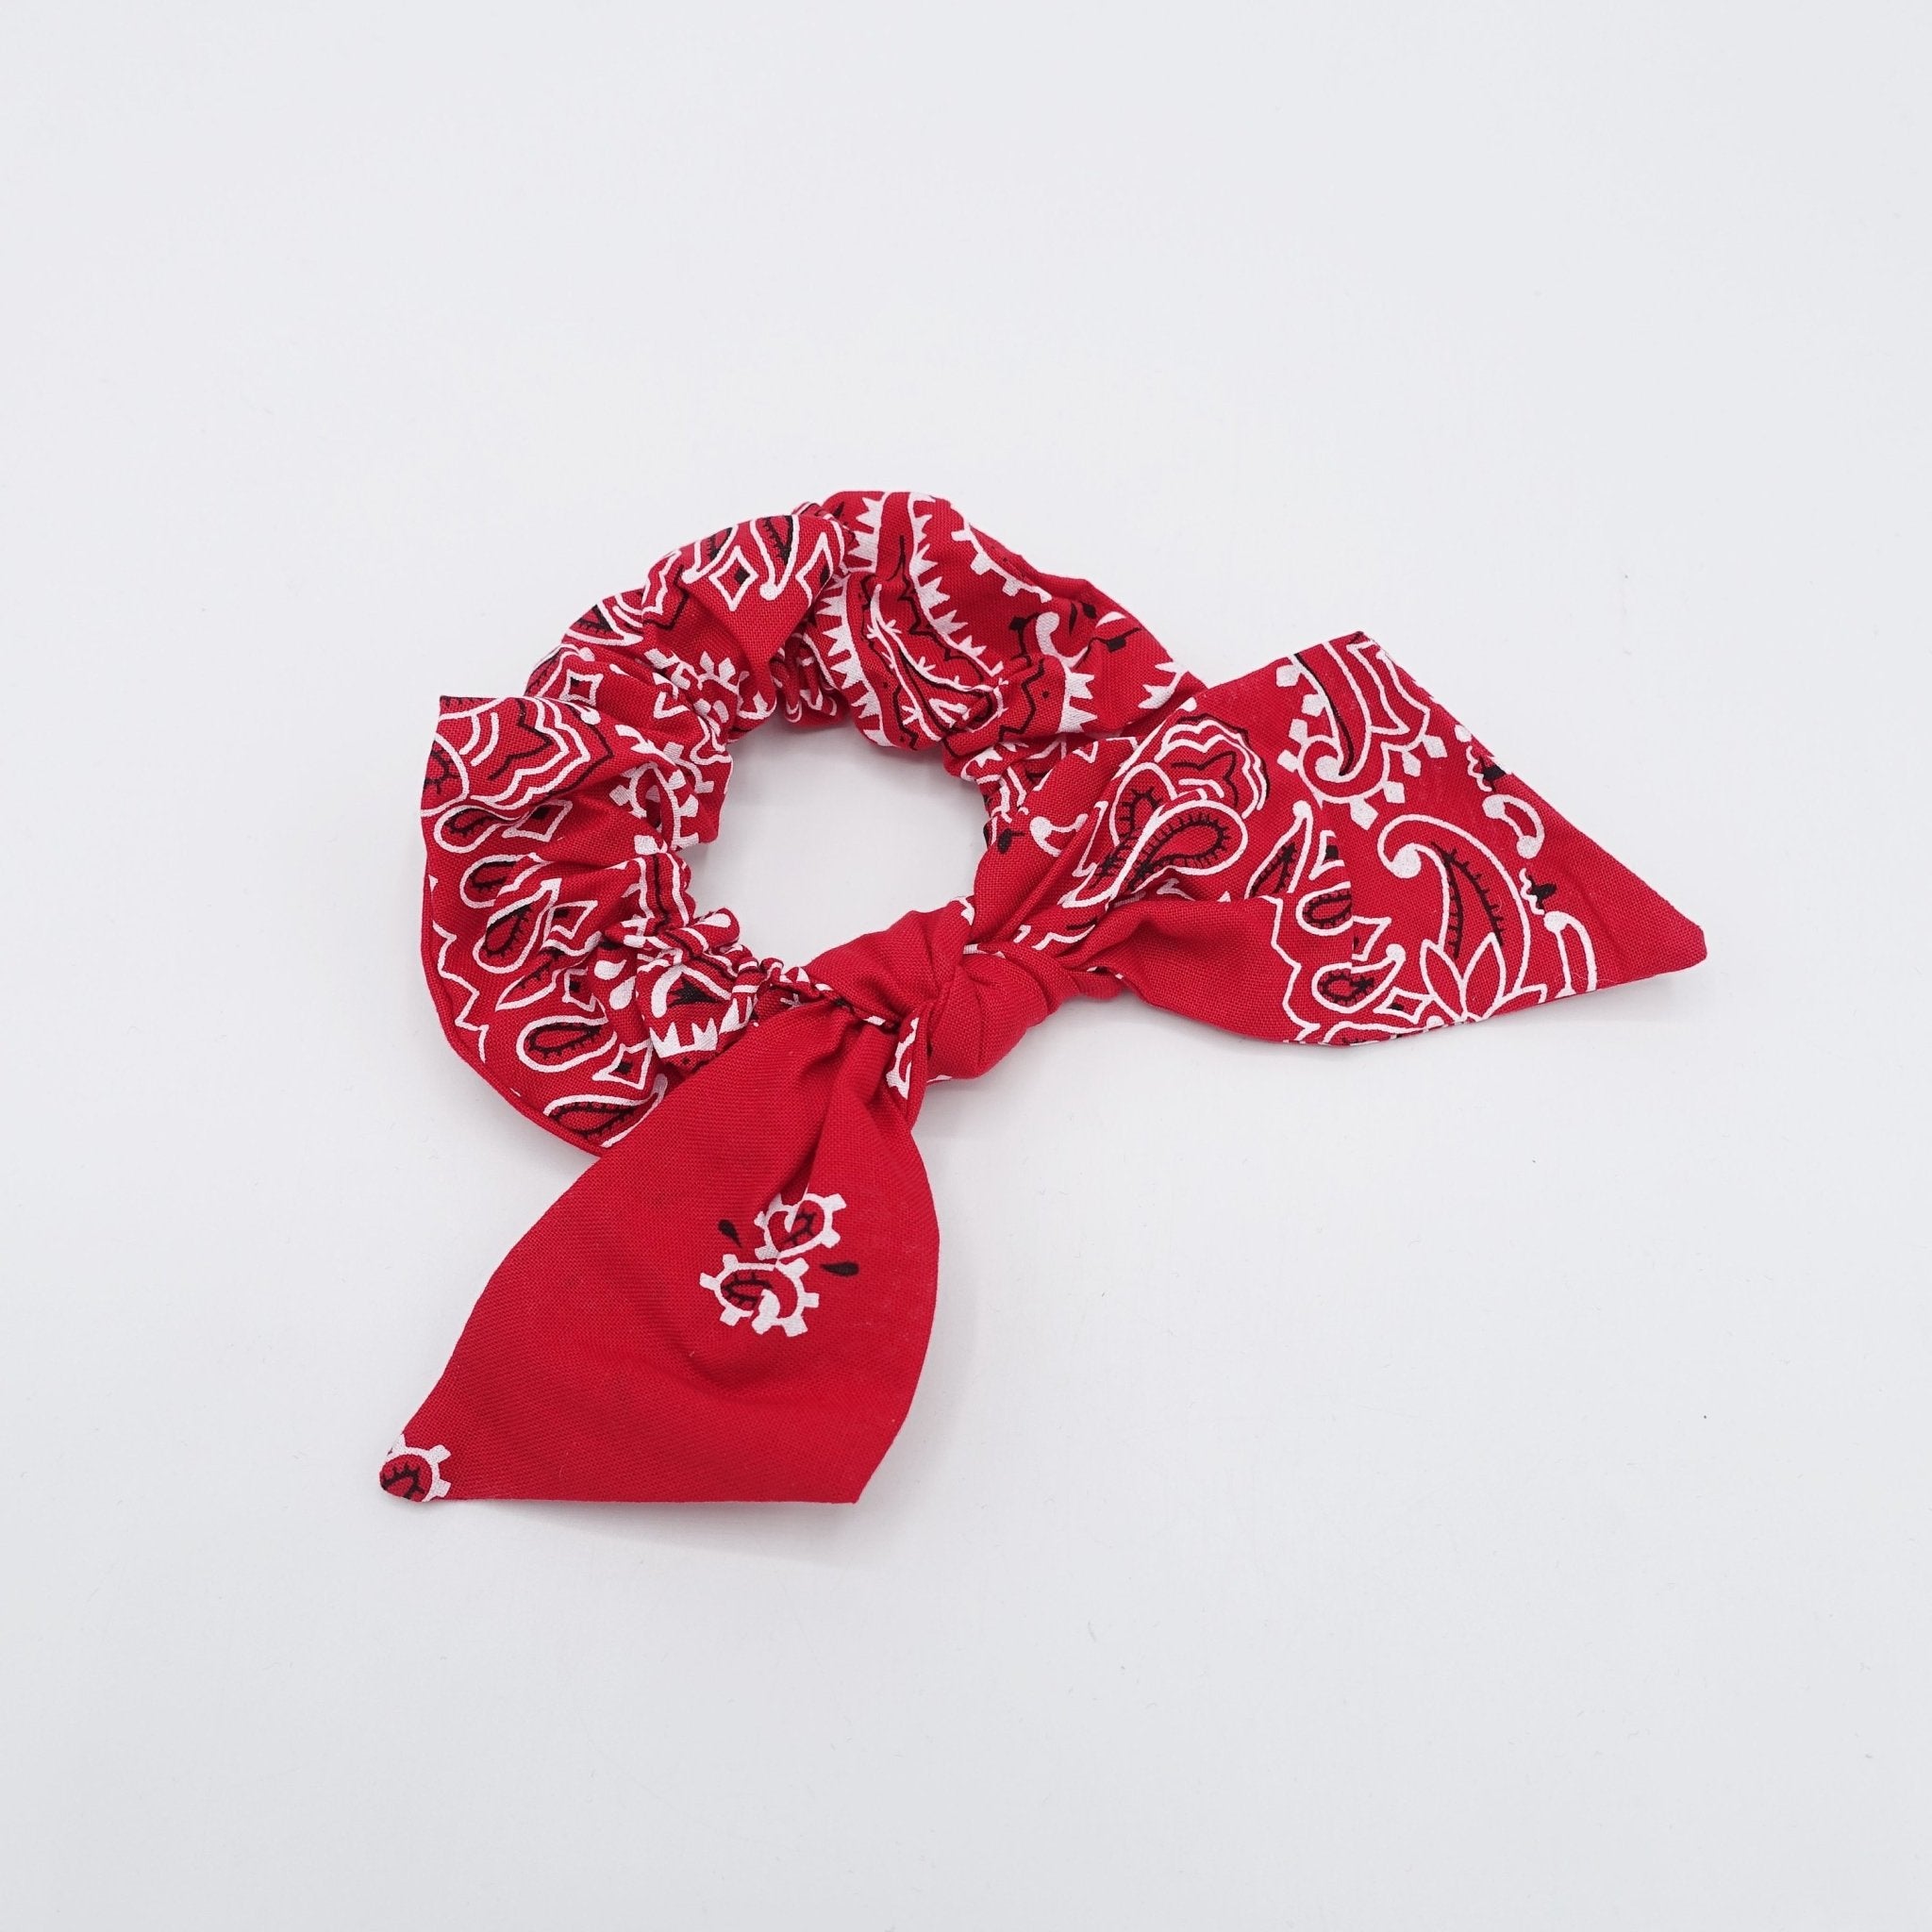 VeryShine scrunchies/hair holder Red cotton paisley print bow knot scrunchies casual hair tie for women